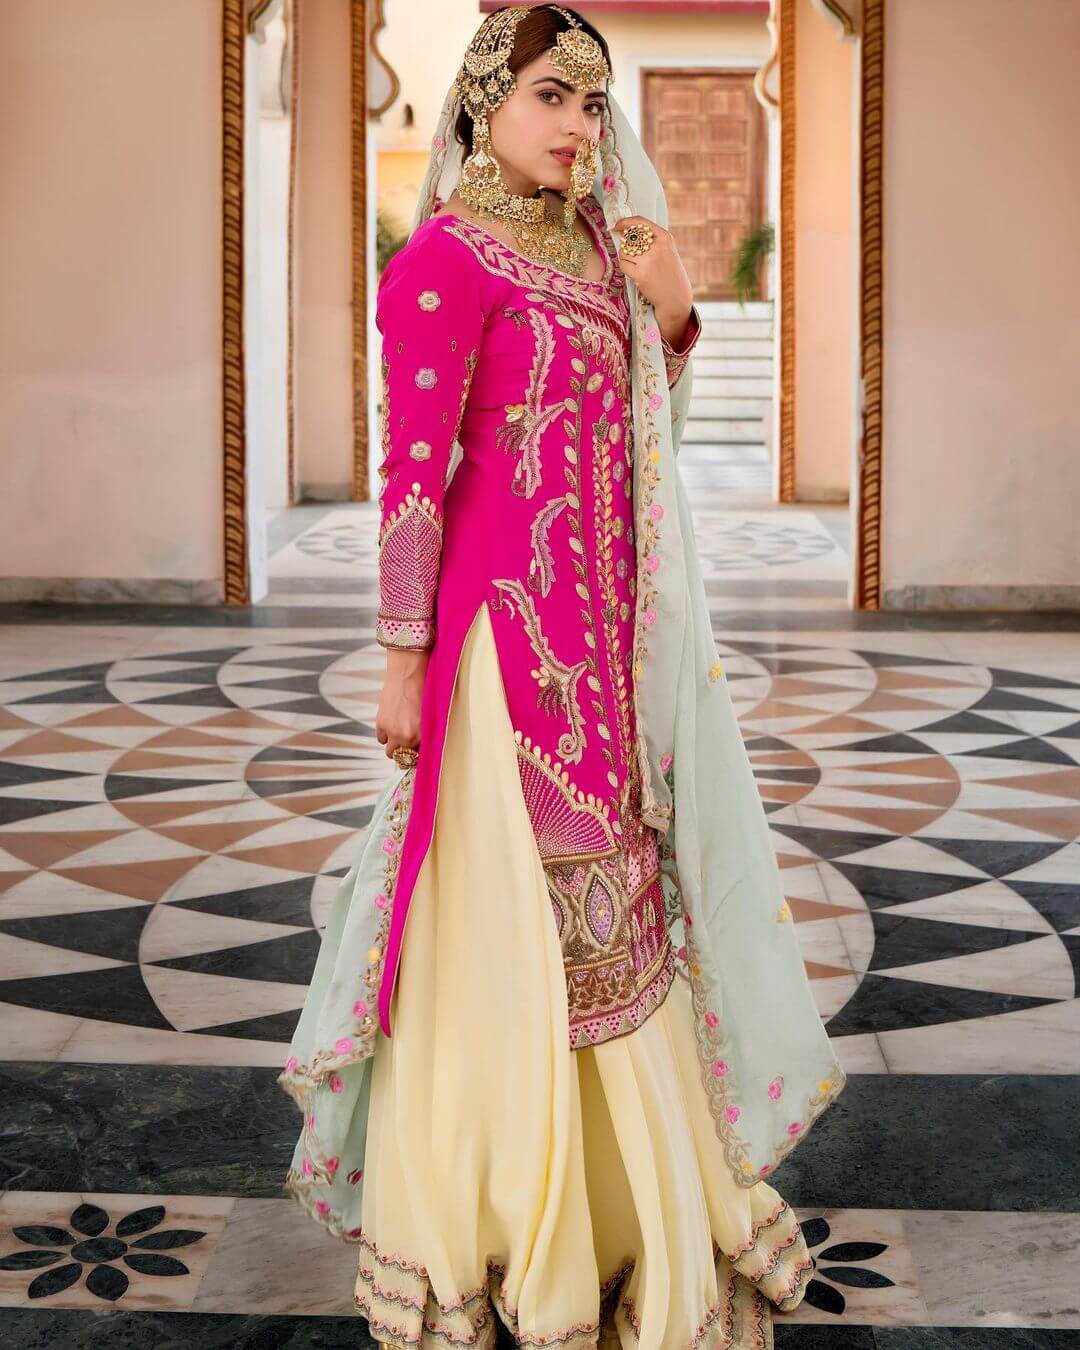 Simi Chahal Gives Us Bridal Vibes In Pink Kurta Palazzo With Heavy Jewellery Simi Chahal Outfit &amp; Looks Inspo